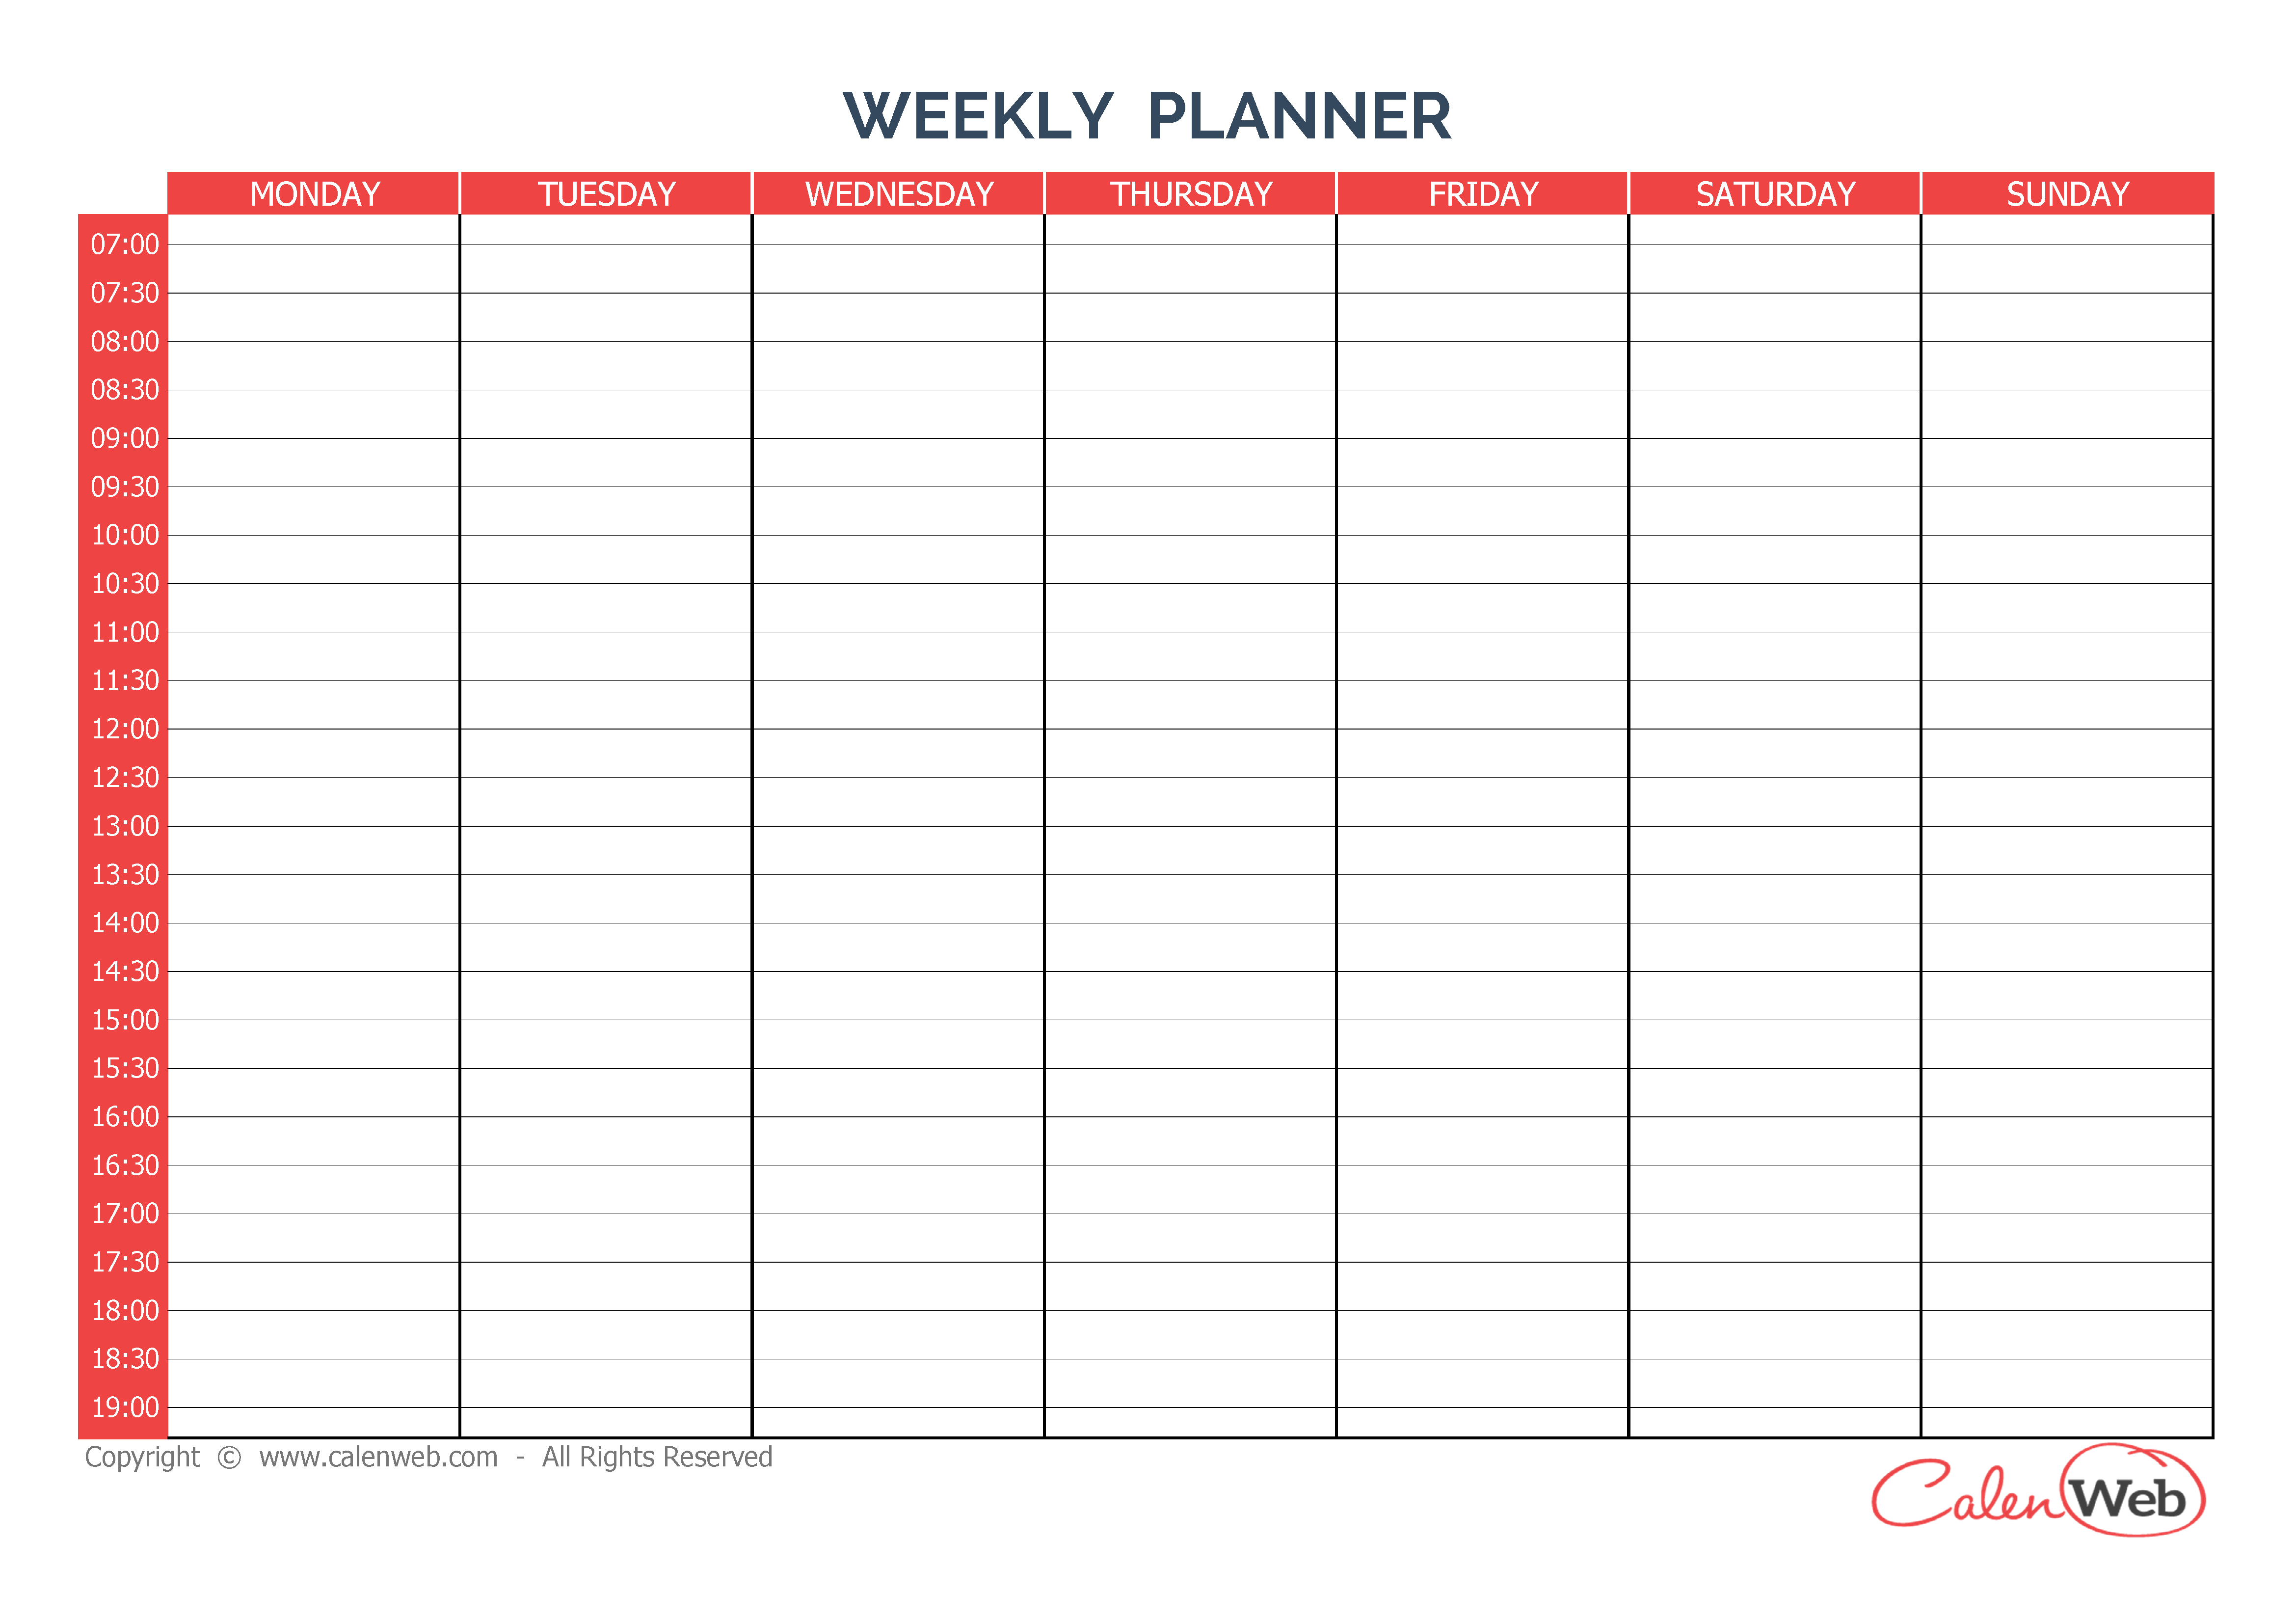 weekly-planner-7-days-first-day-monday-a-week-of-7-days-first-day-monday-calenweb